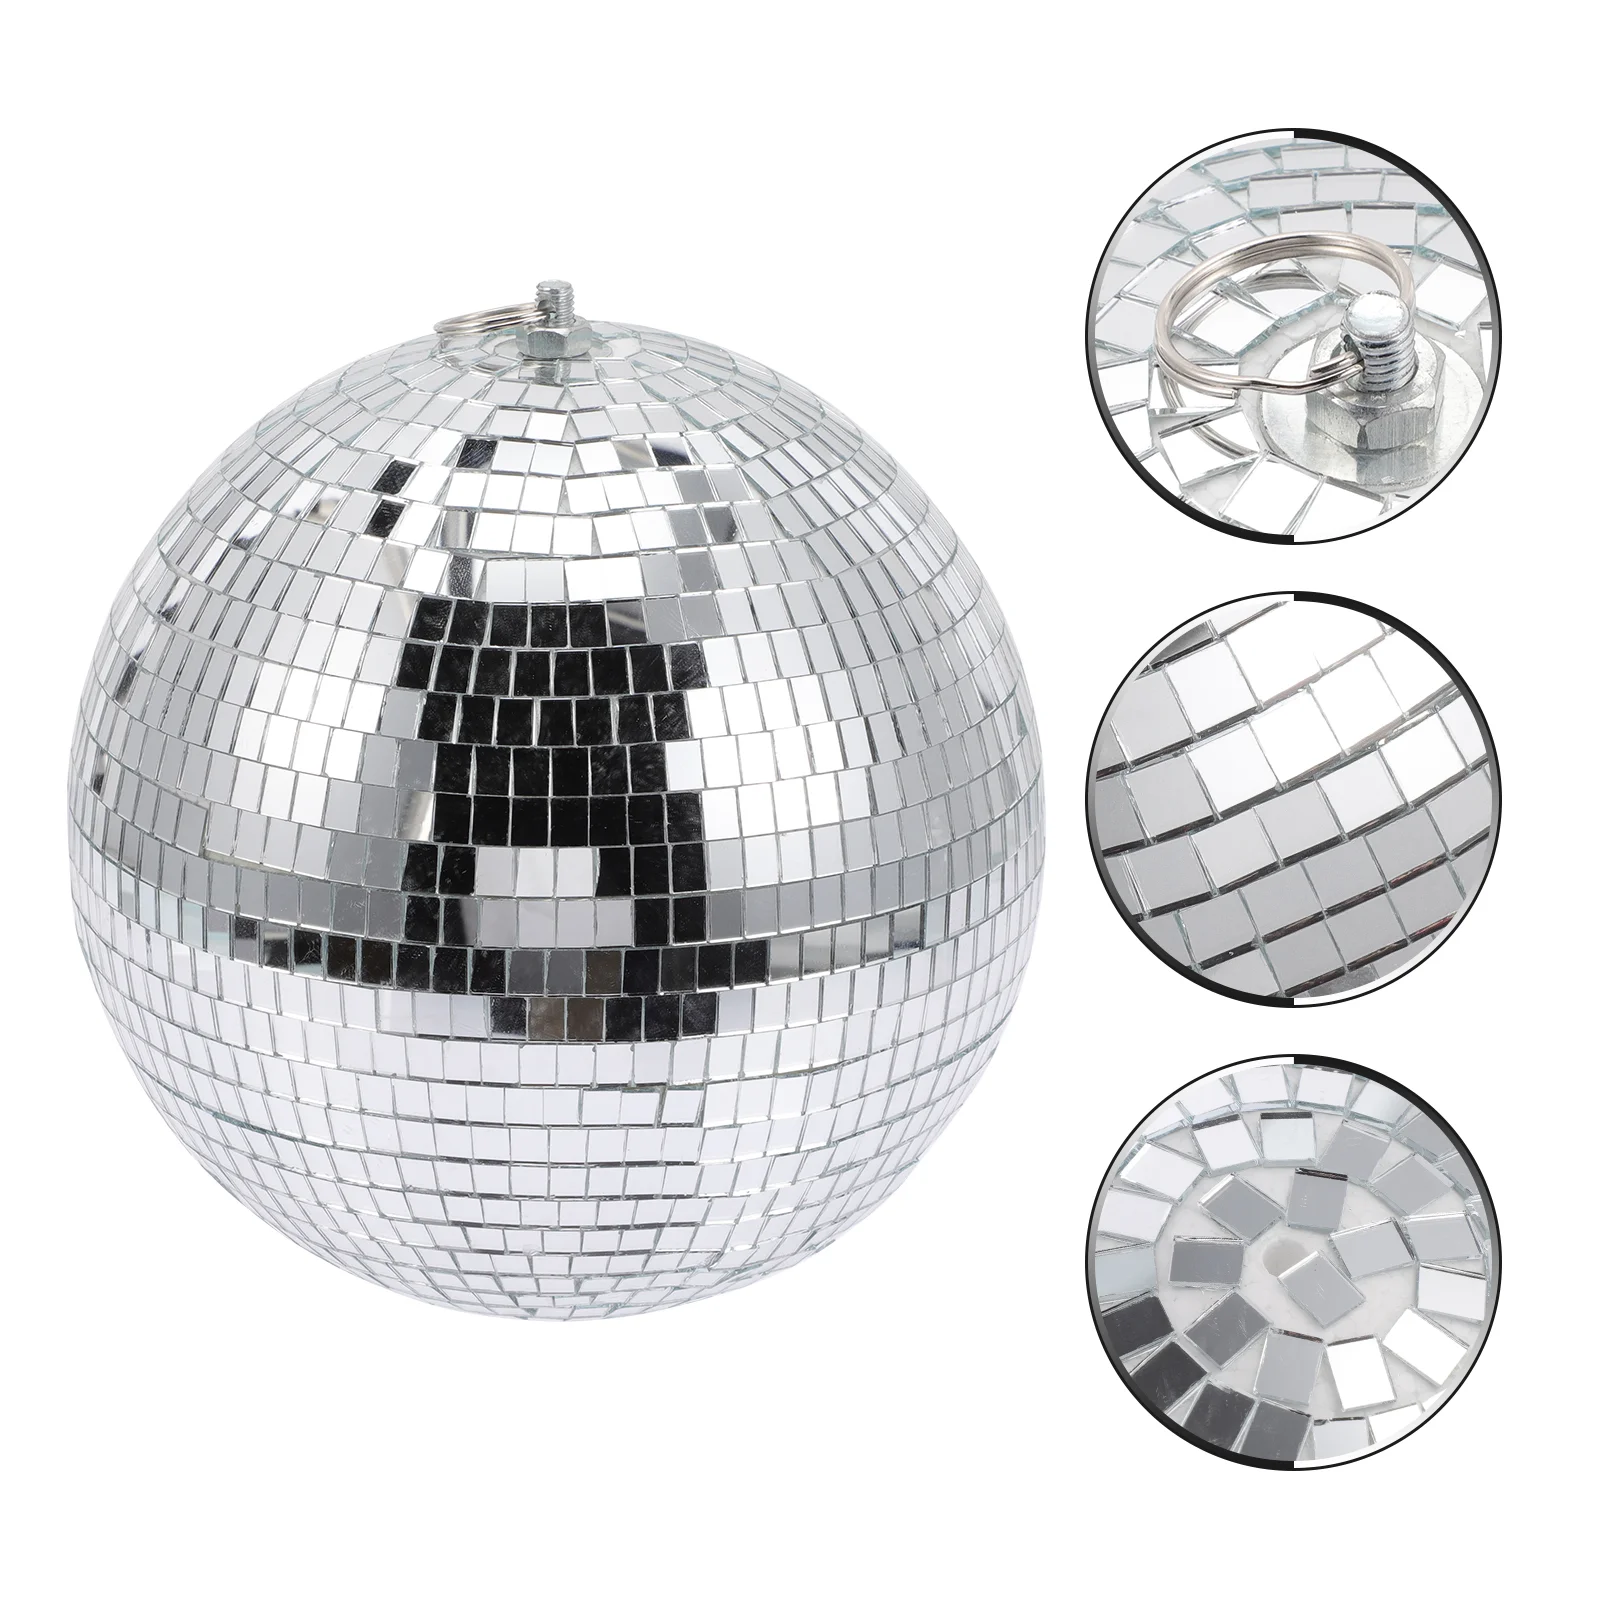 

Silver Mirror Reflective Disco: 20cm Nightclub Flash Mirror Ornament Hanging Bauble Shatterproof Balls for Holiday Faceted